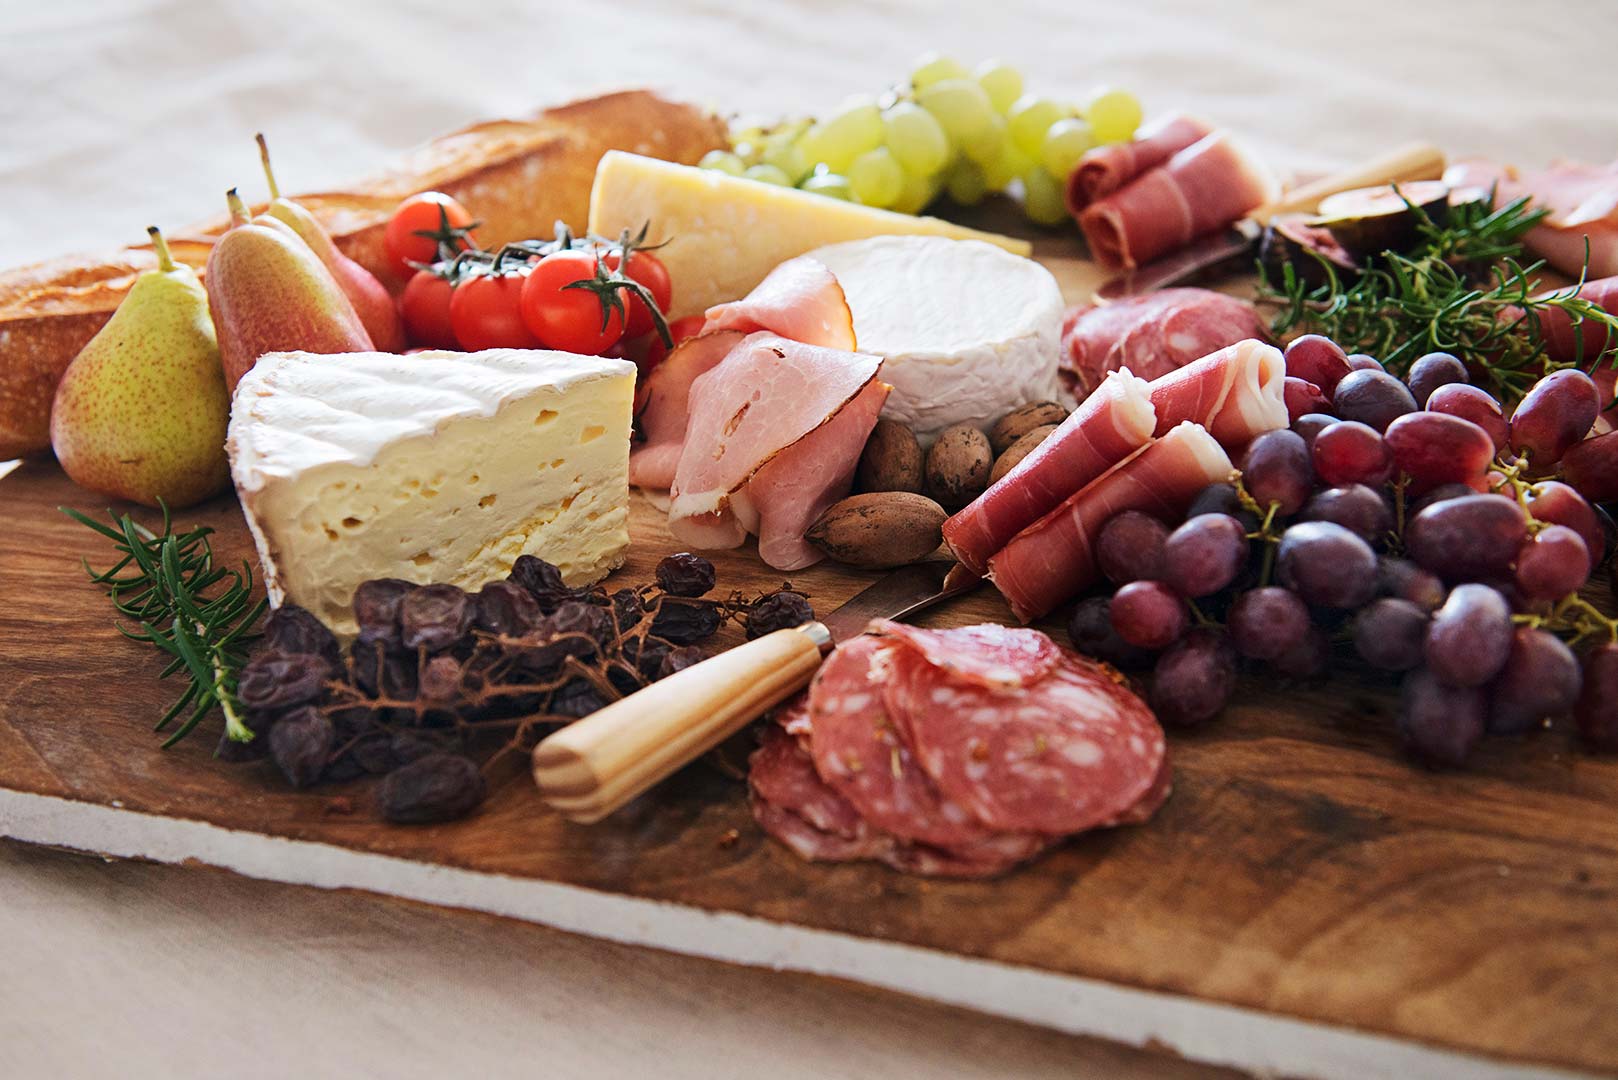 Delicious grazing board full of cheeses, cured meats & grapes, nuts etc from the food platter range 